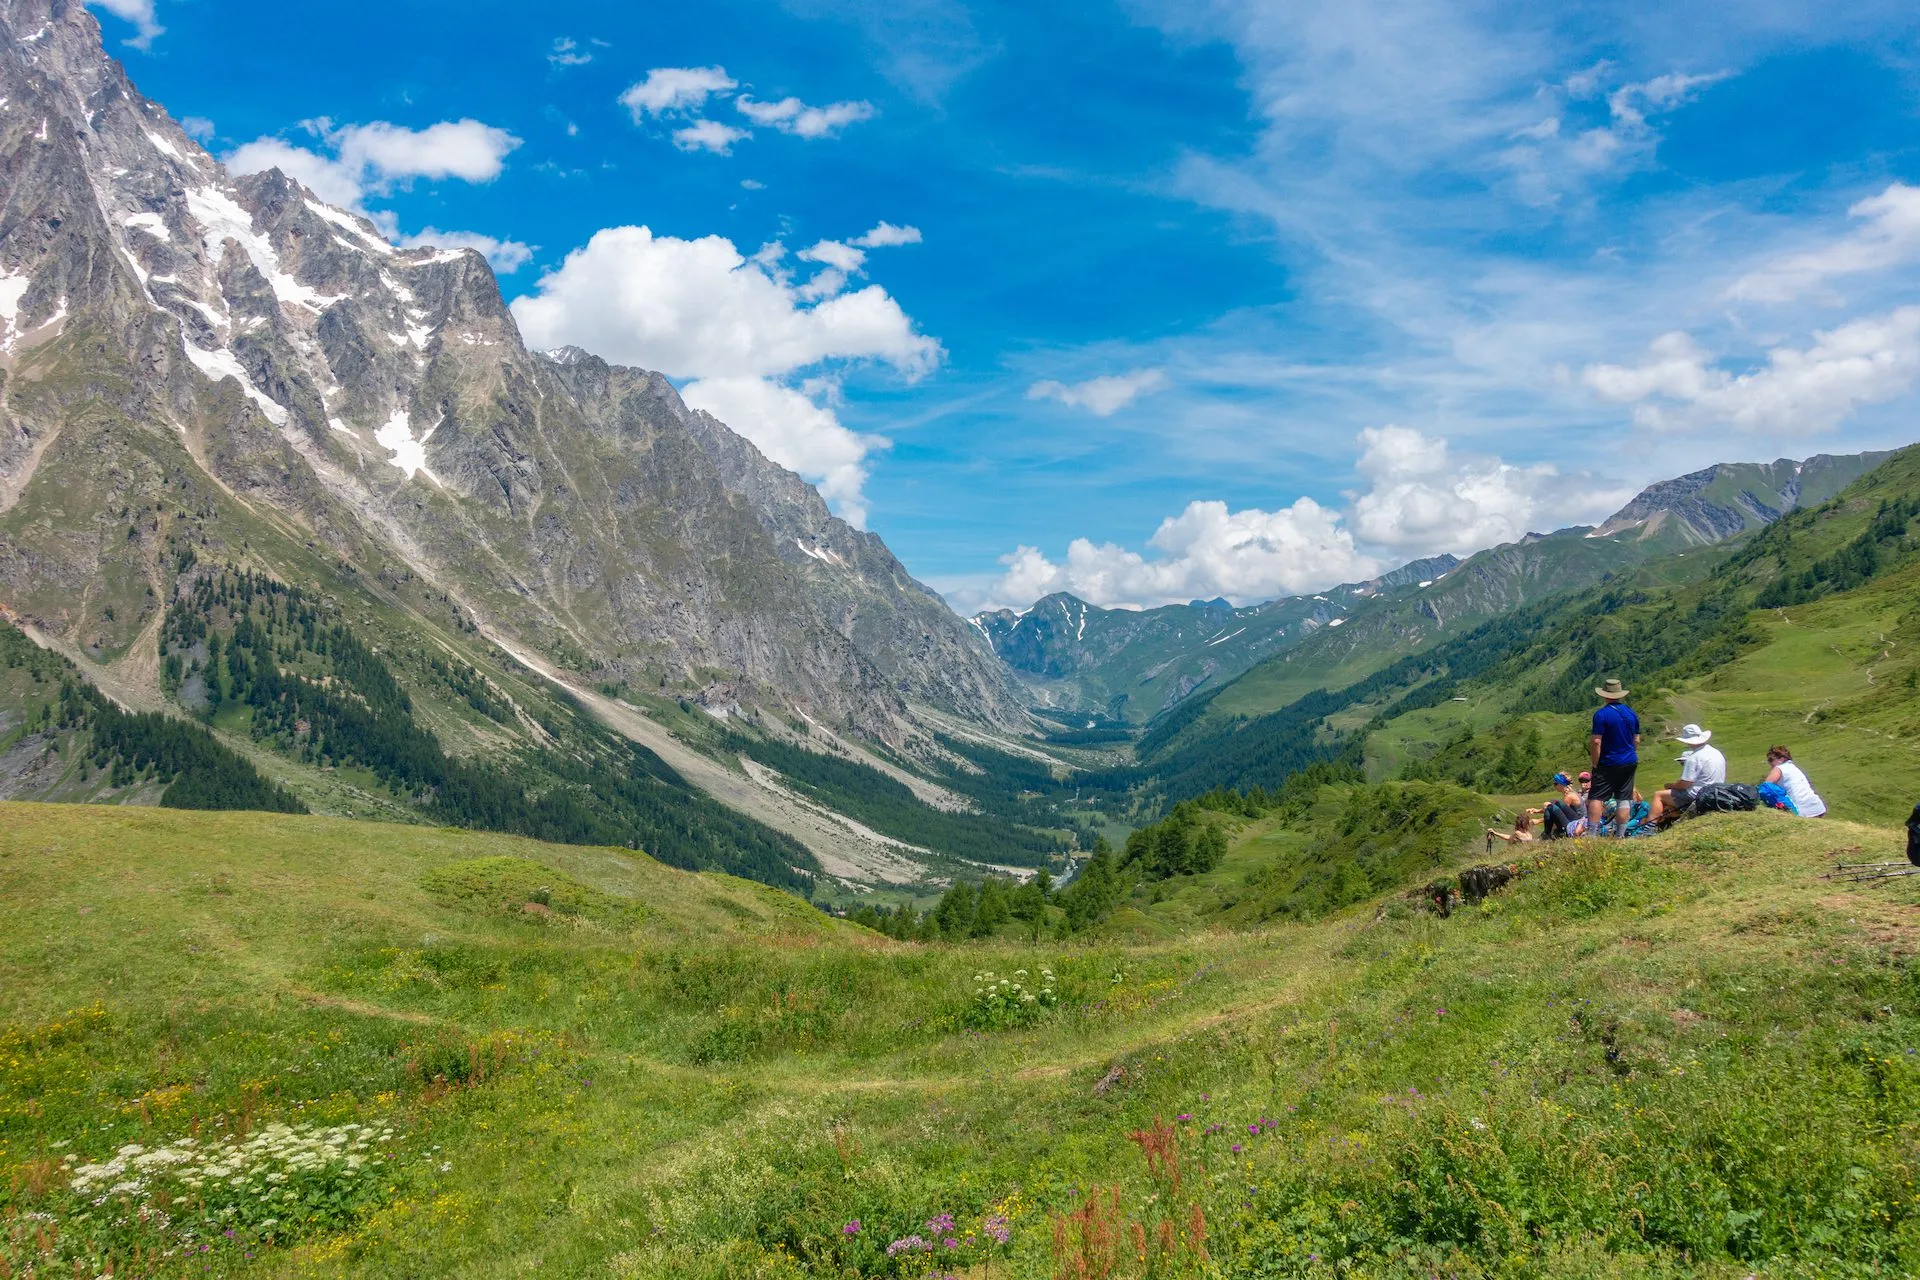 Val Ferret is an immensly scenic alpine valley